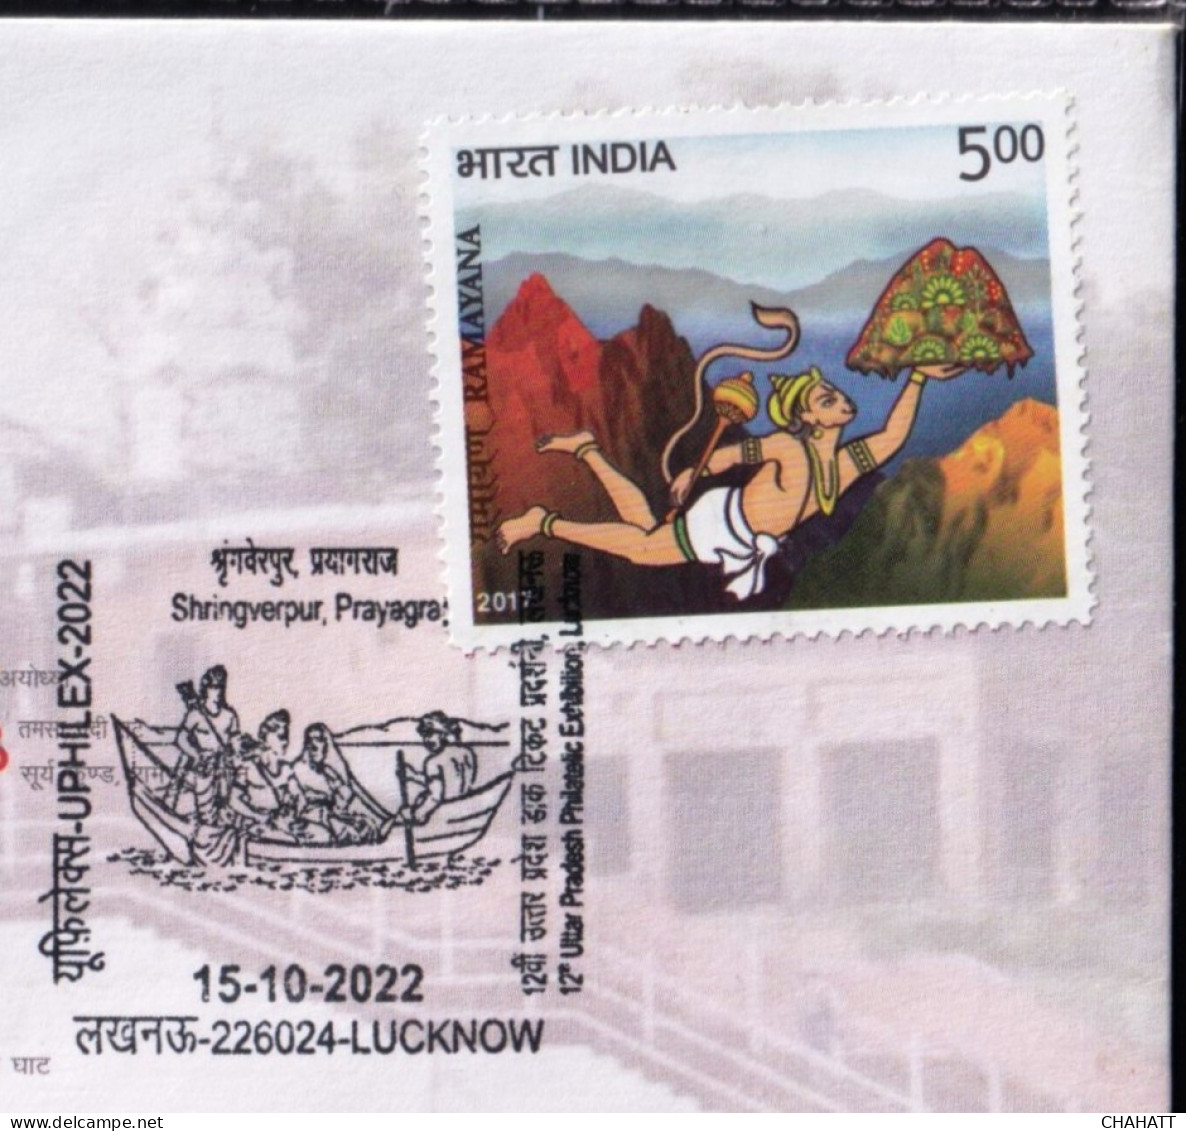 HINDUISM - RAMAYAN- SRINGESWAR- RIVER CROSSING BY BOAT - PICTORIAL CANCELLATION - SPECIAL COVER - INDIA -2022- BX4-23 - Hinduism